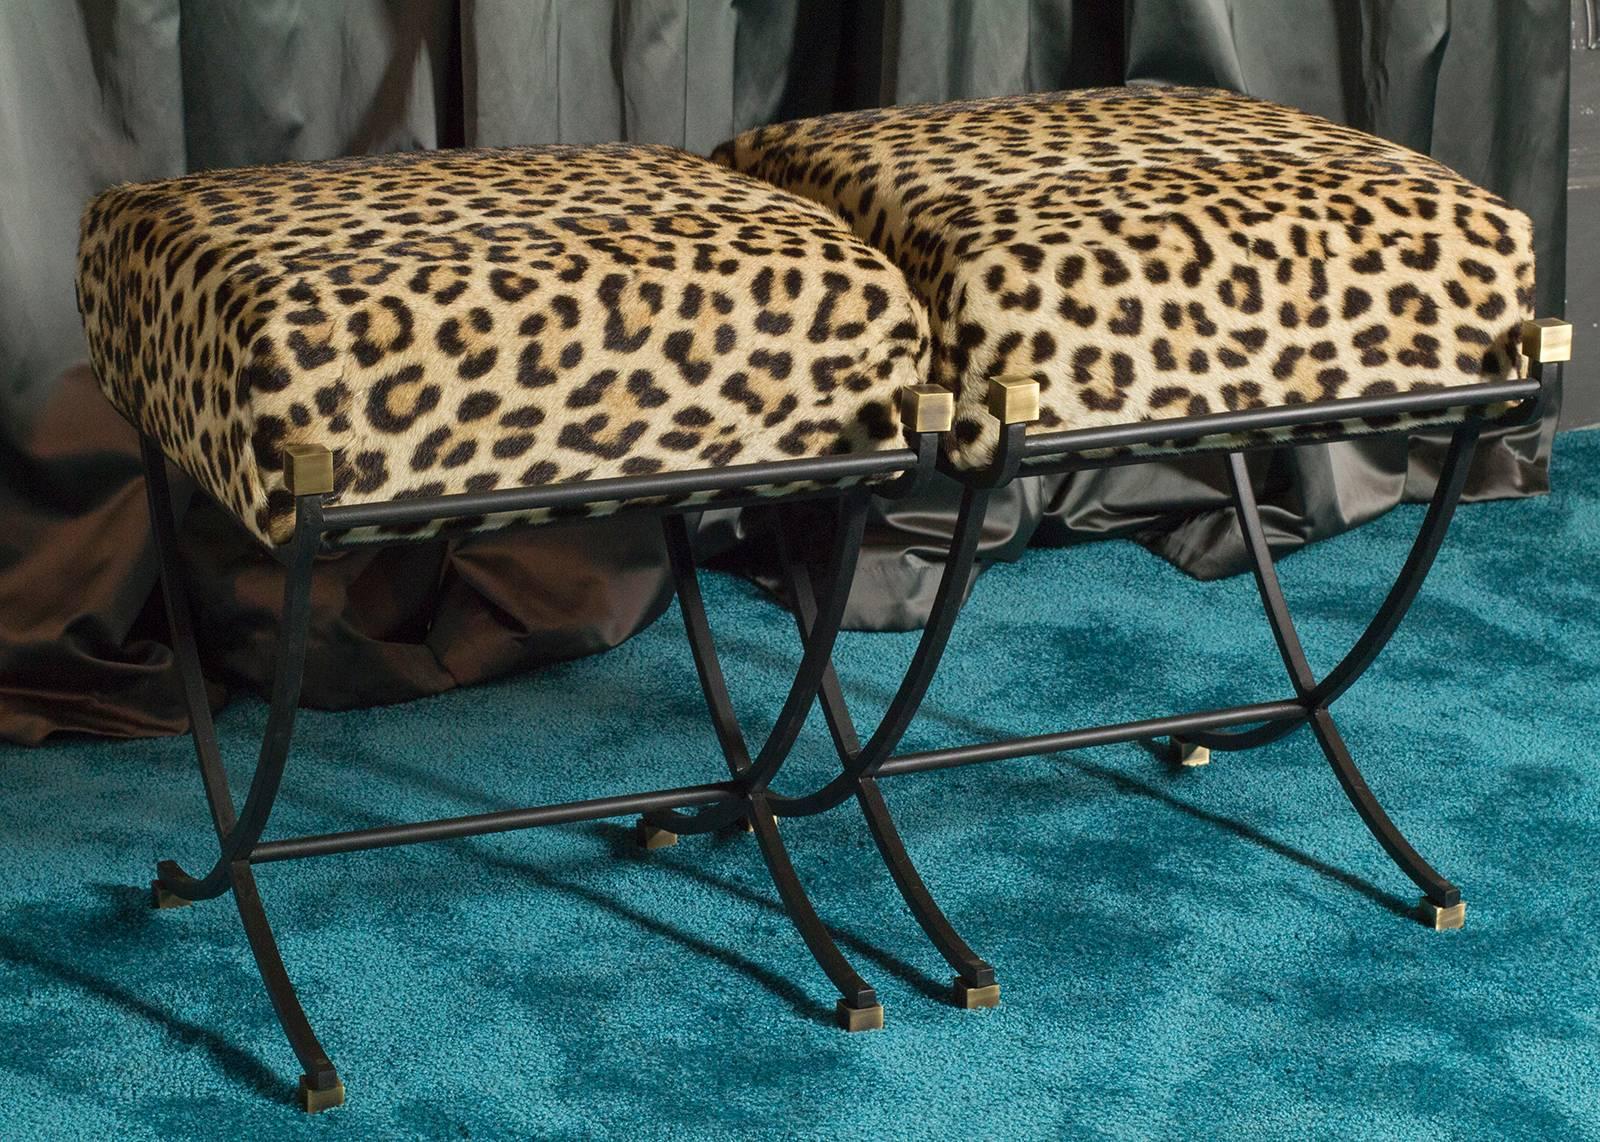 Original steel and brass structure with seat cushions newly covered in real Leopard skin.